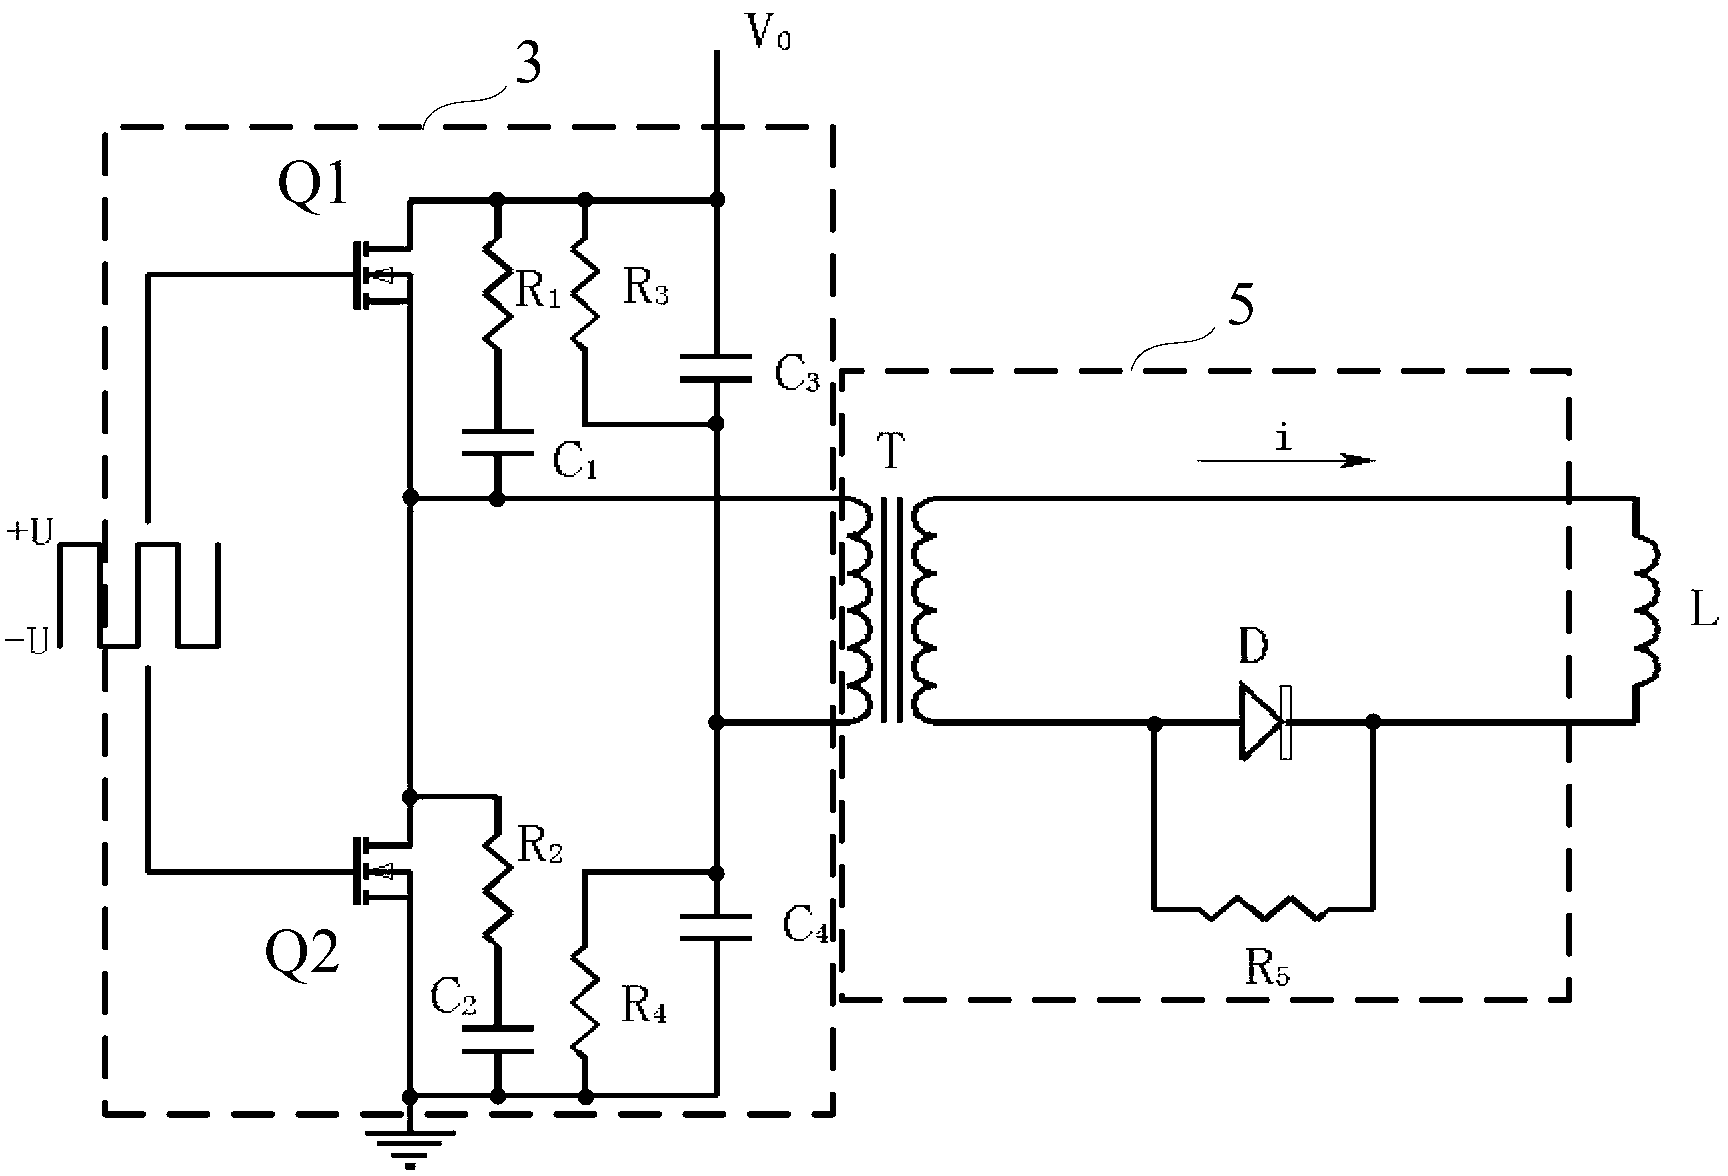 Ultrasonic wave power source for driving magnetostrictive transducer